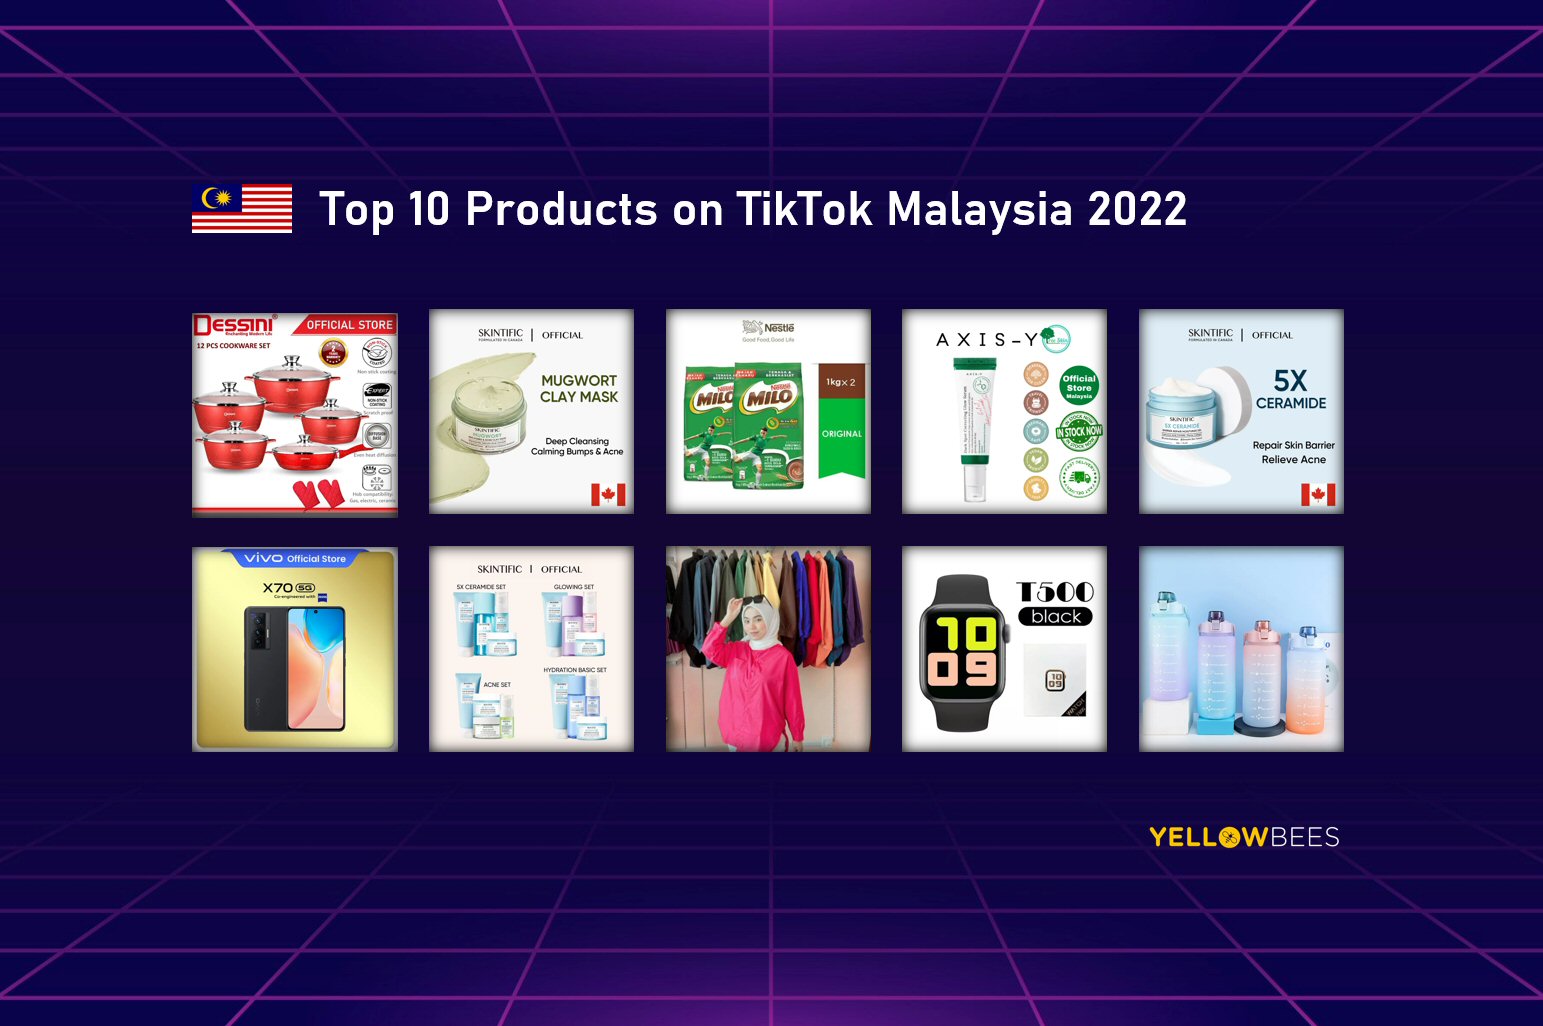 Top 10 Selling Products on TikTok Shop in Malaysia